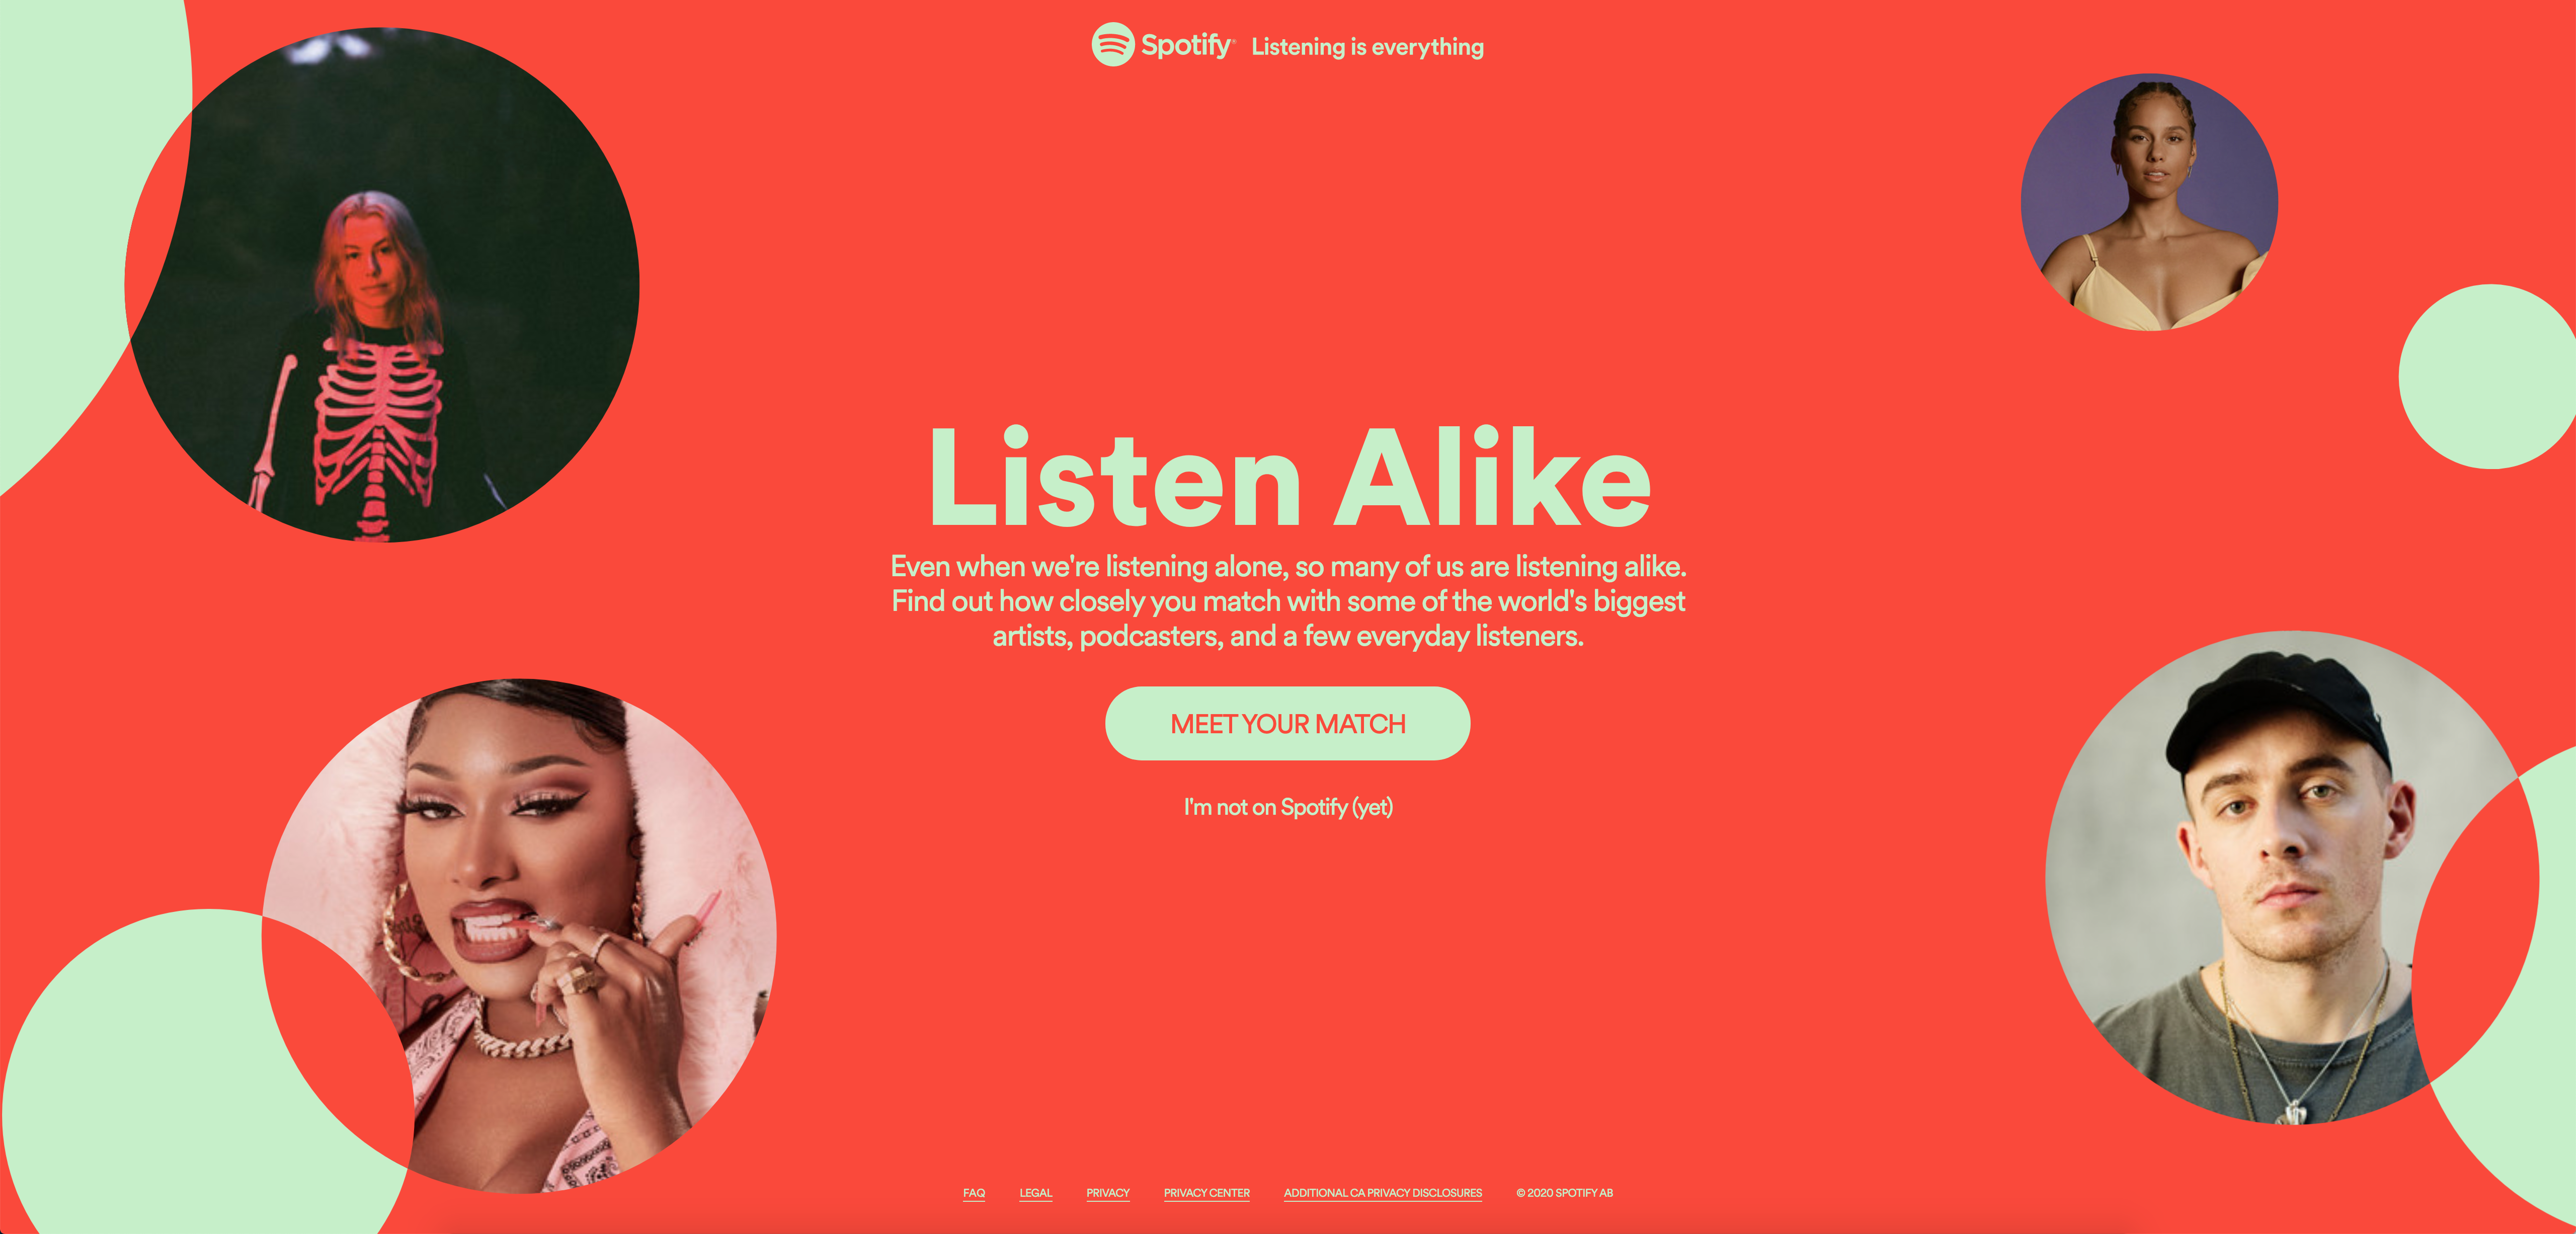 Discover your listening similarities with your favourite artists using Spotify’s Listen Alike